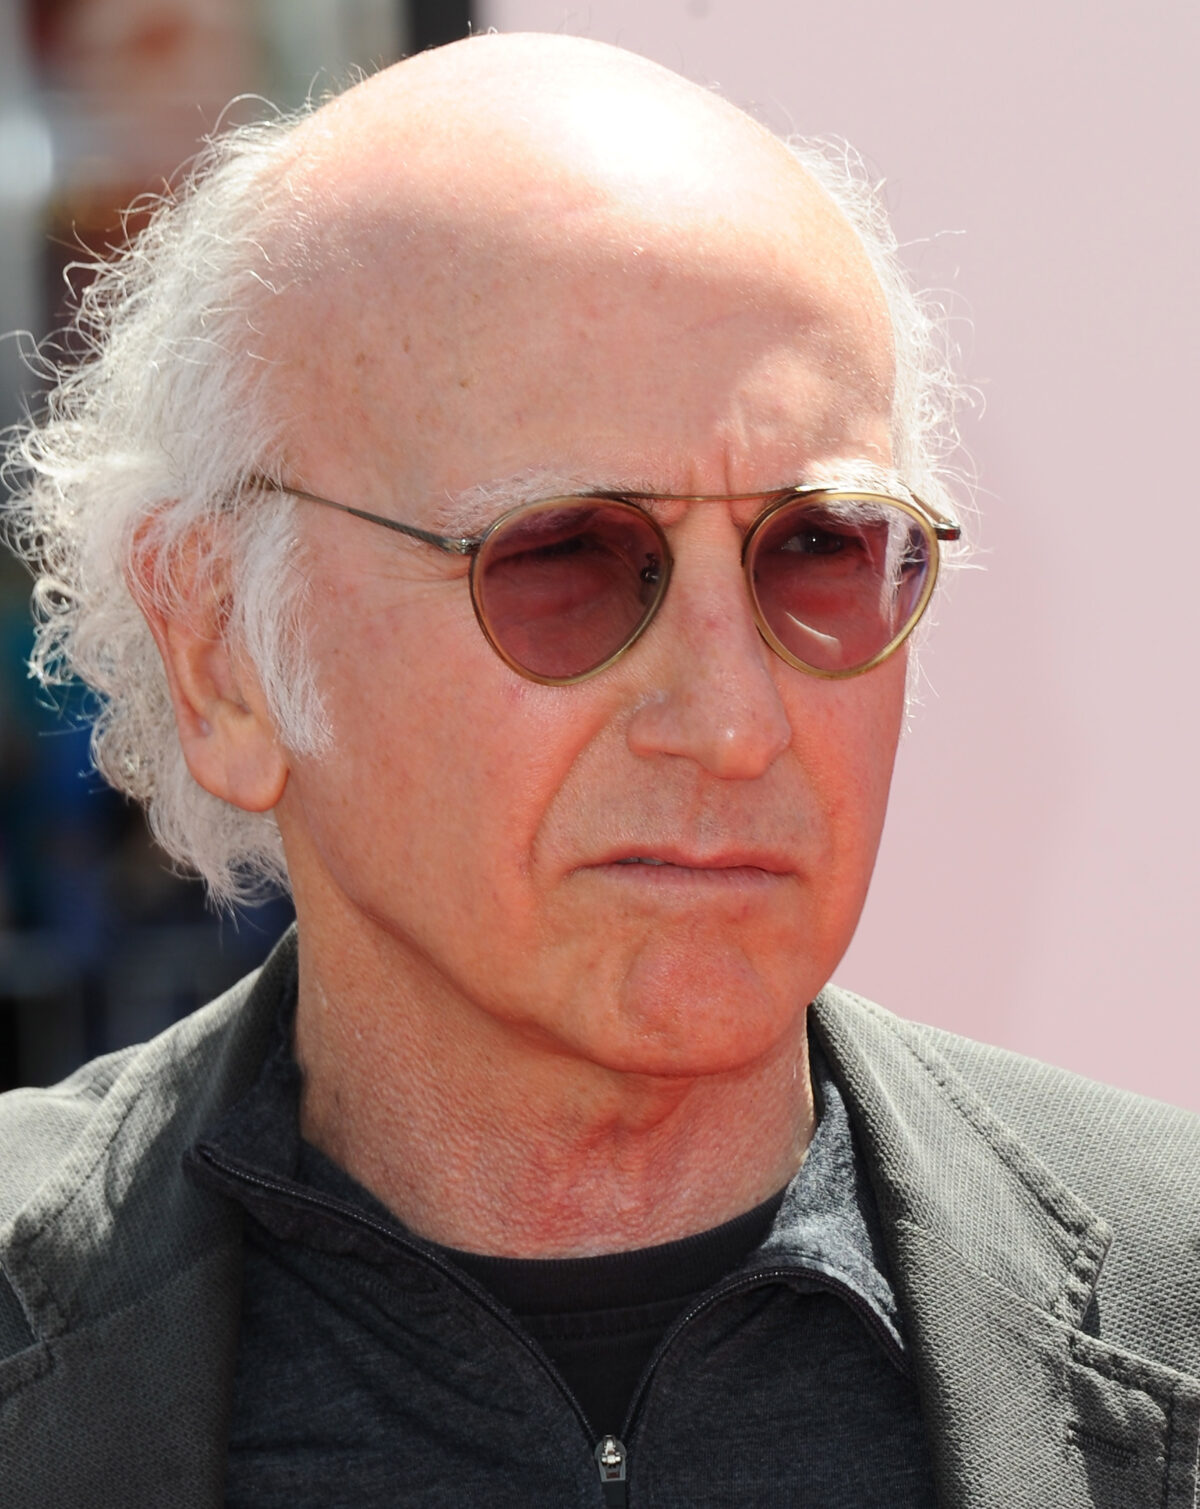 The best images of Larry David as he turns 75